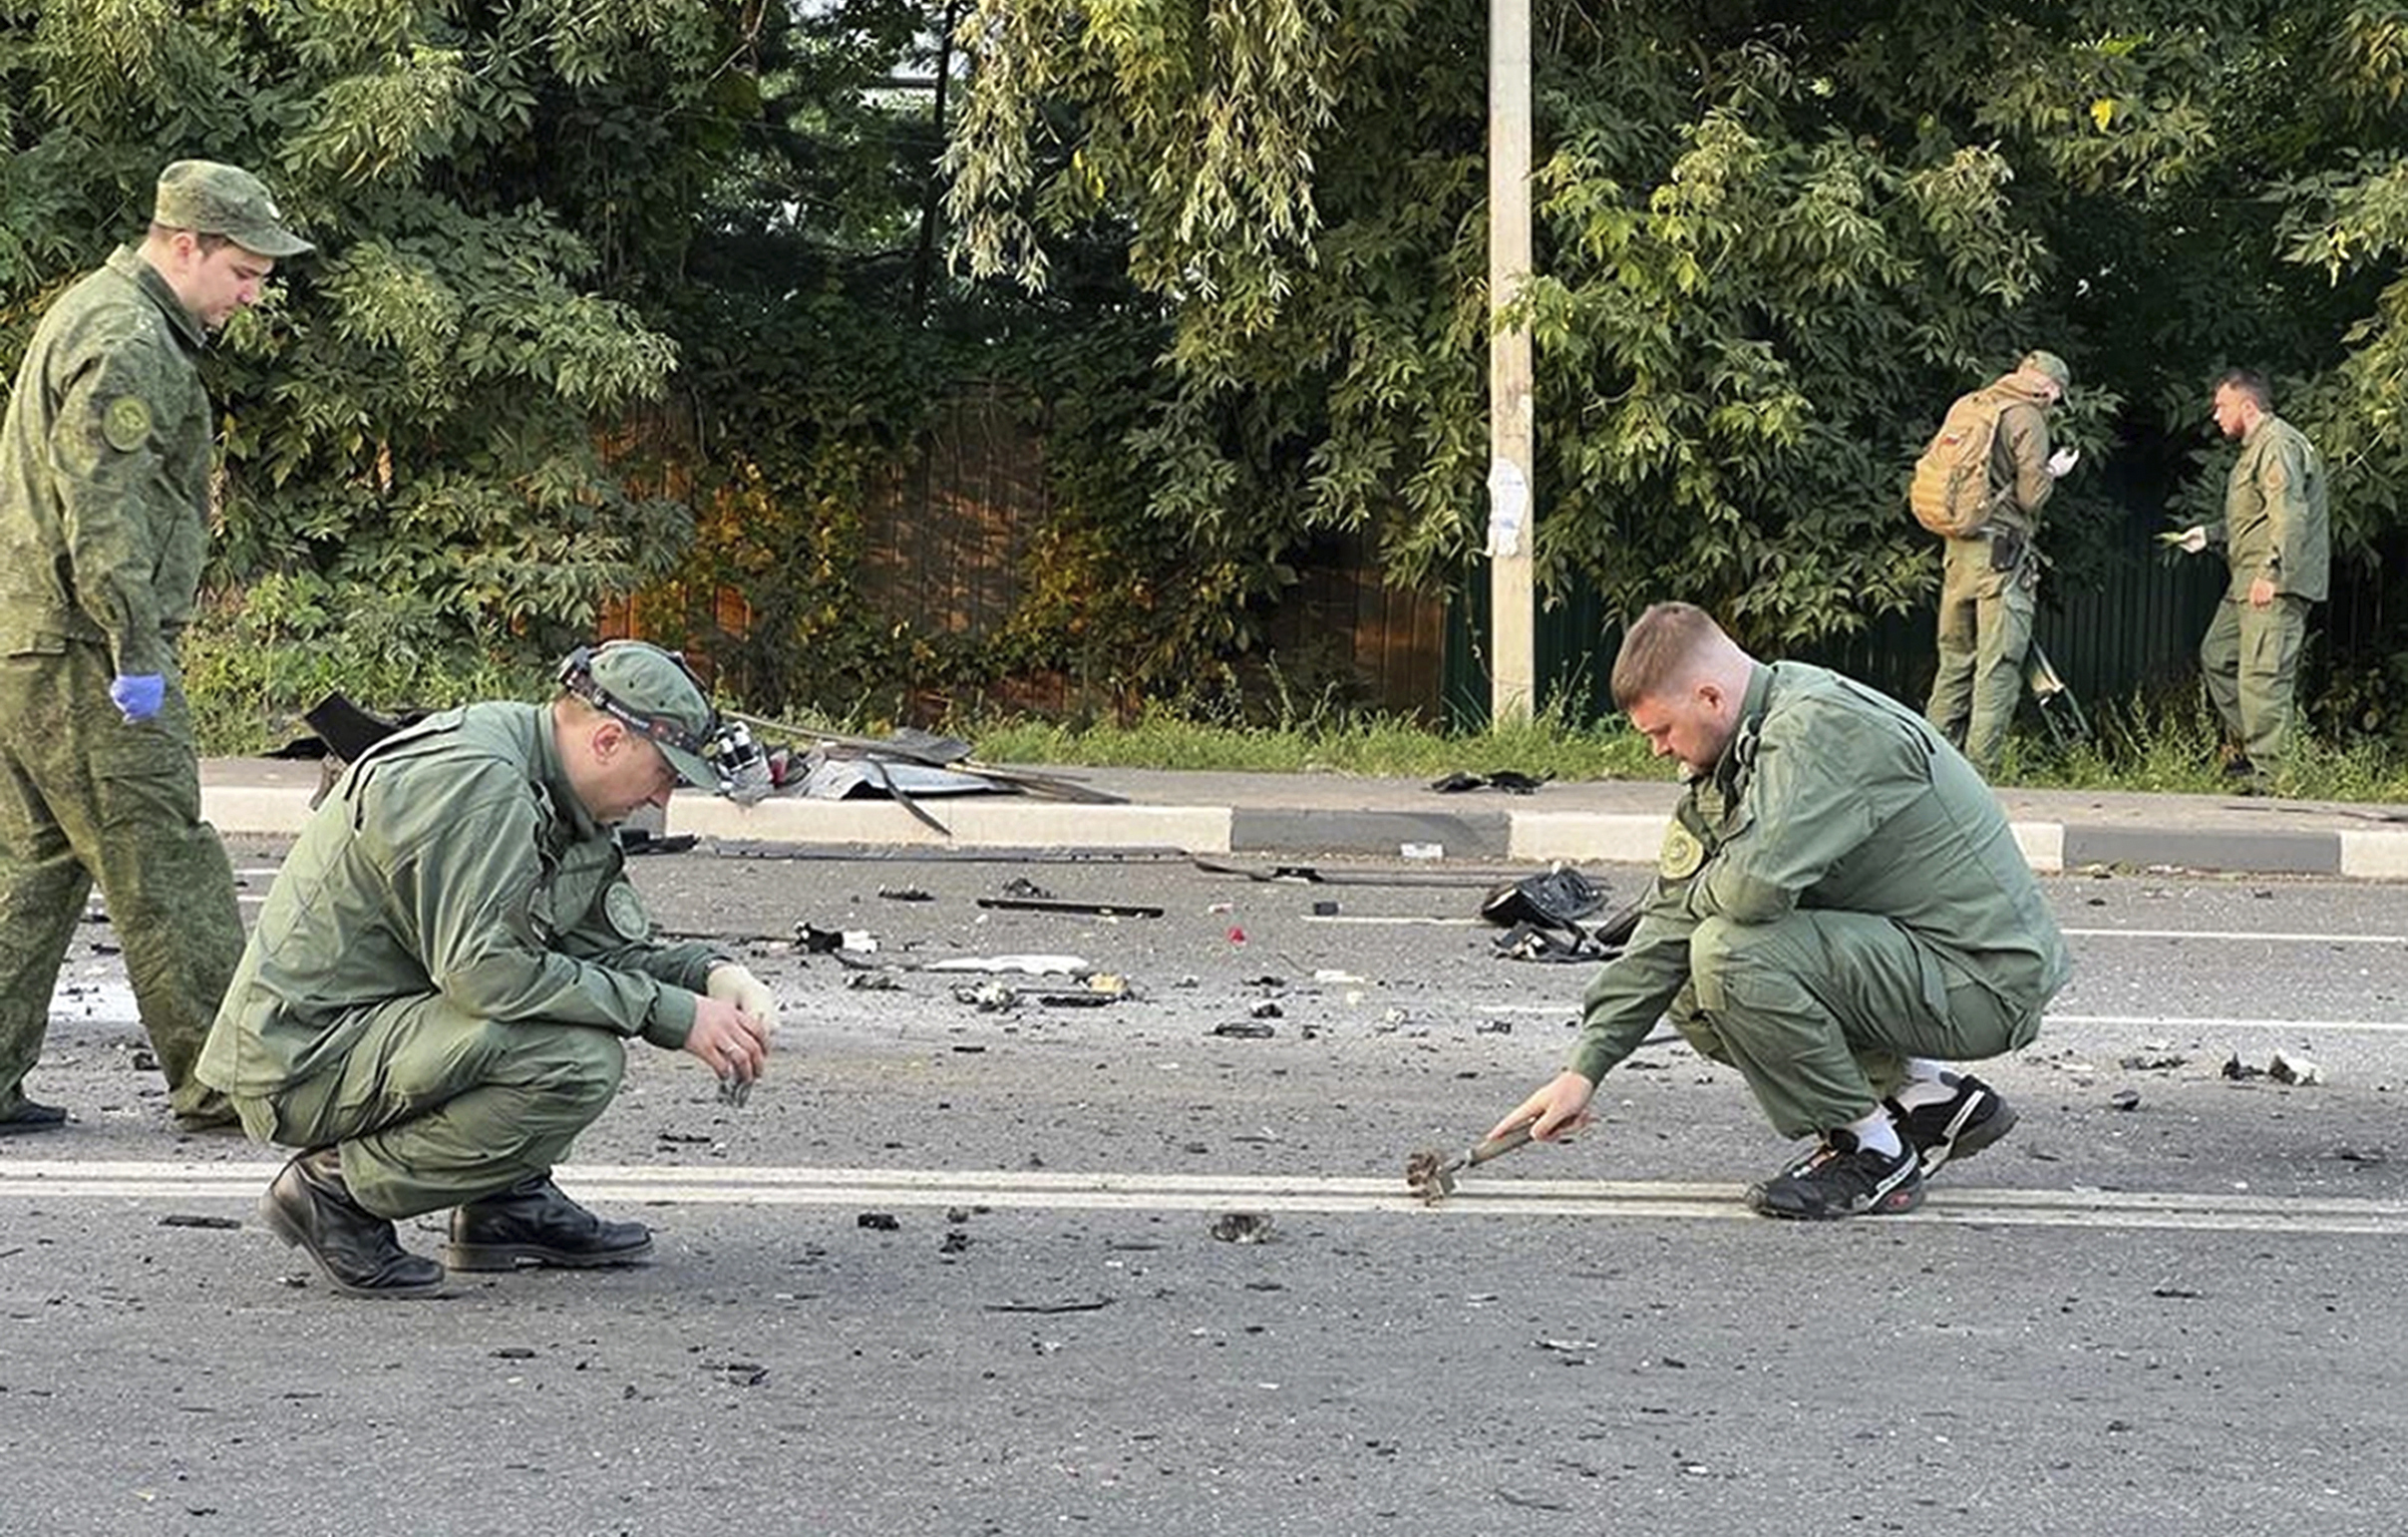 People in green jumpsuits crouch on a roadway looking at debris.